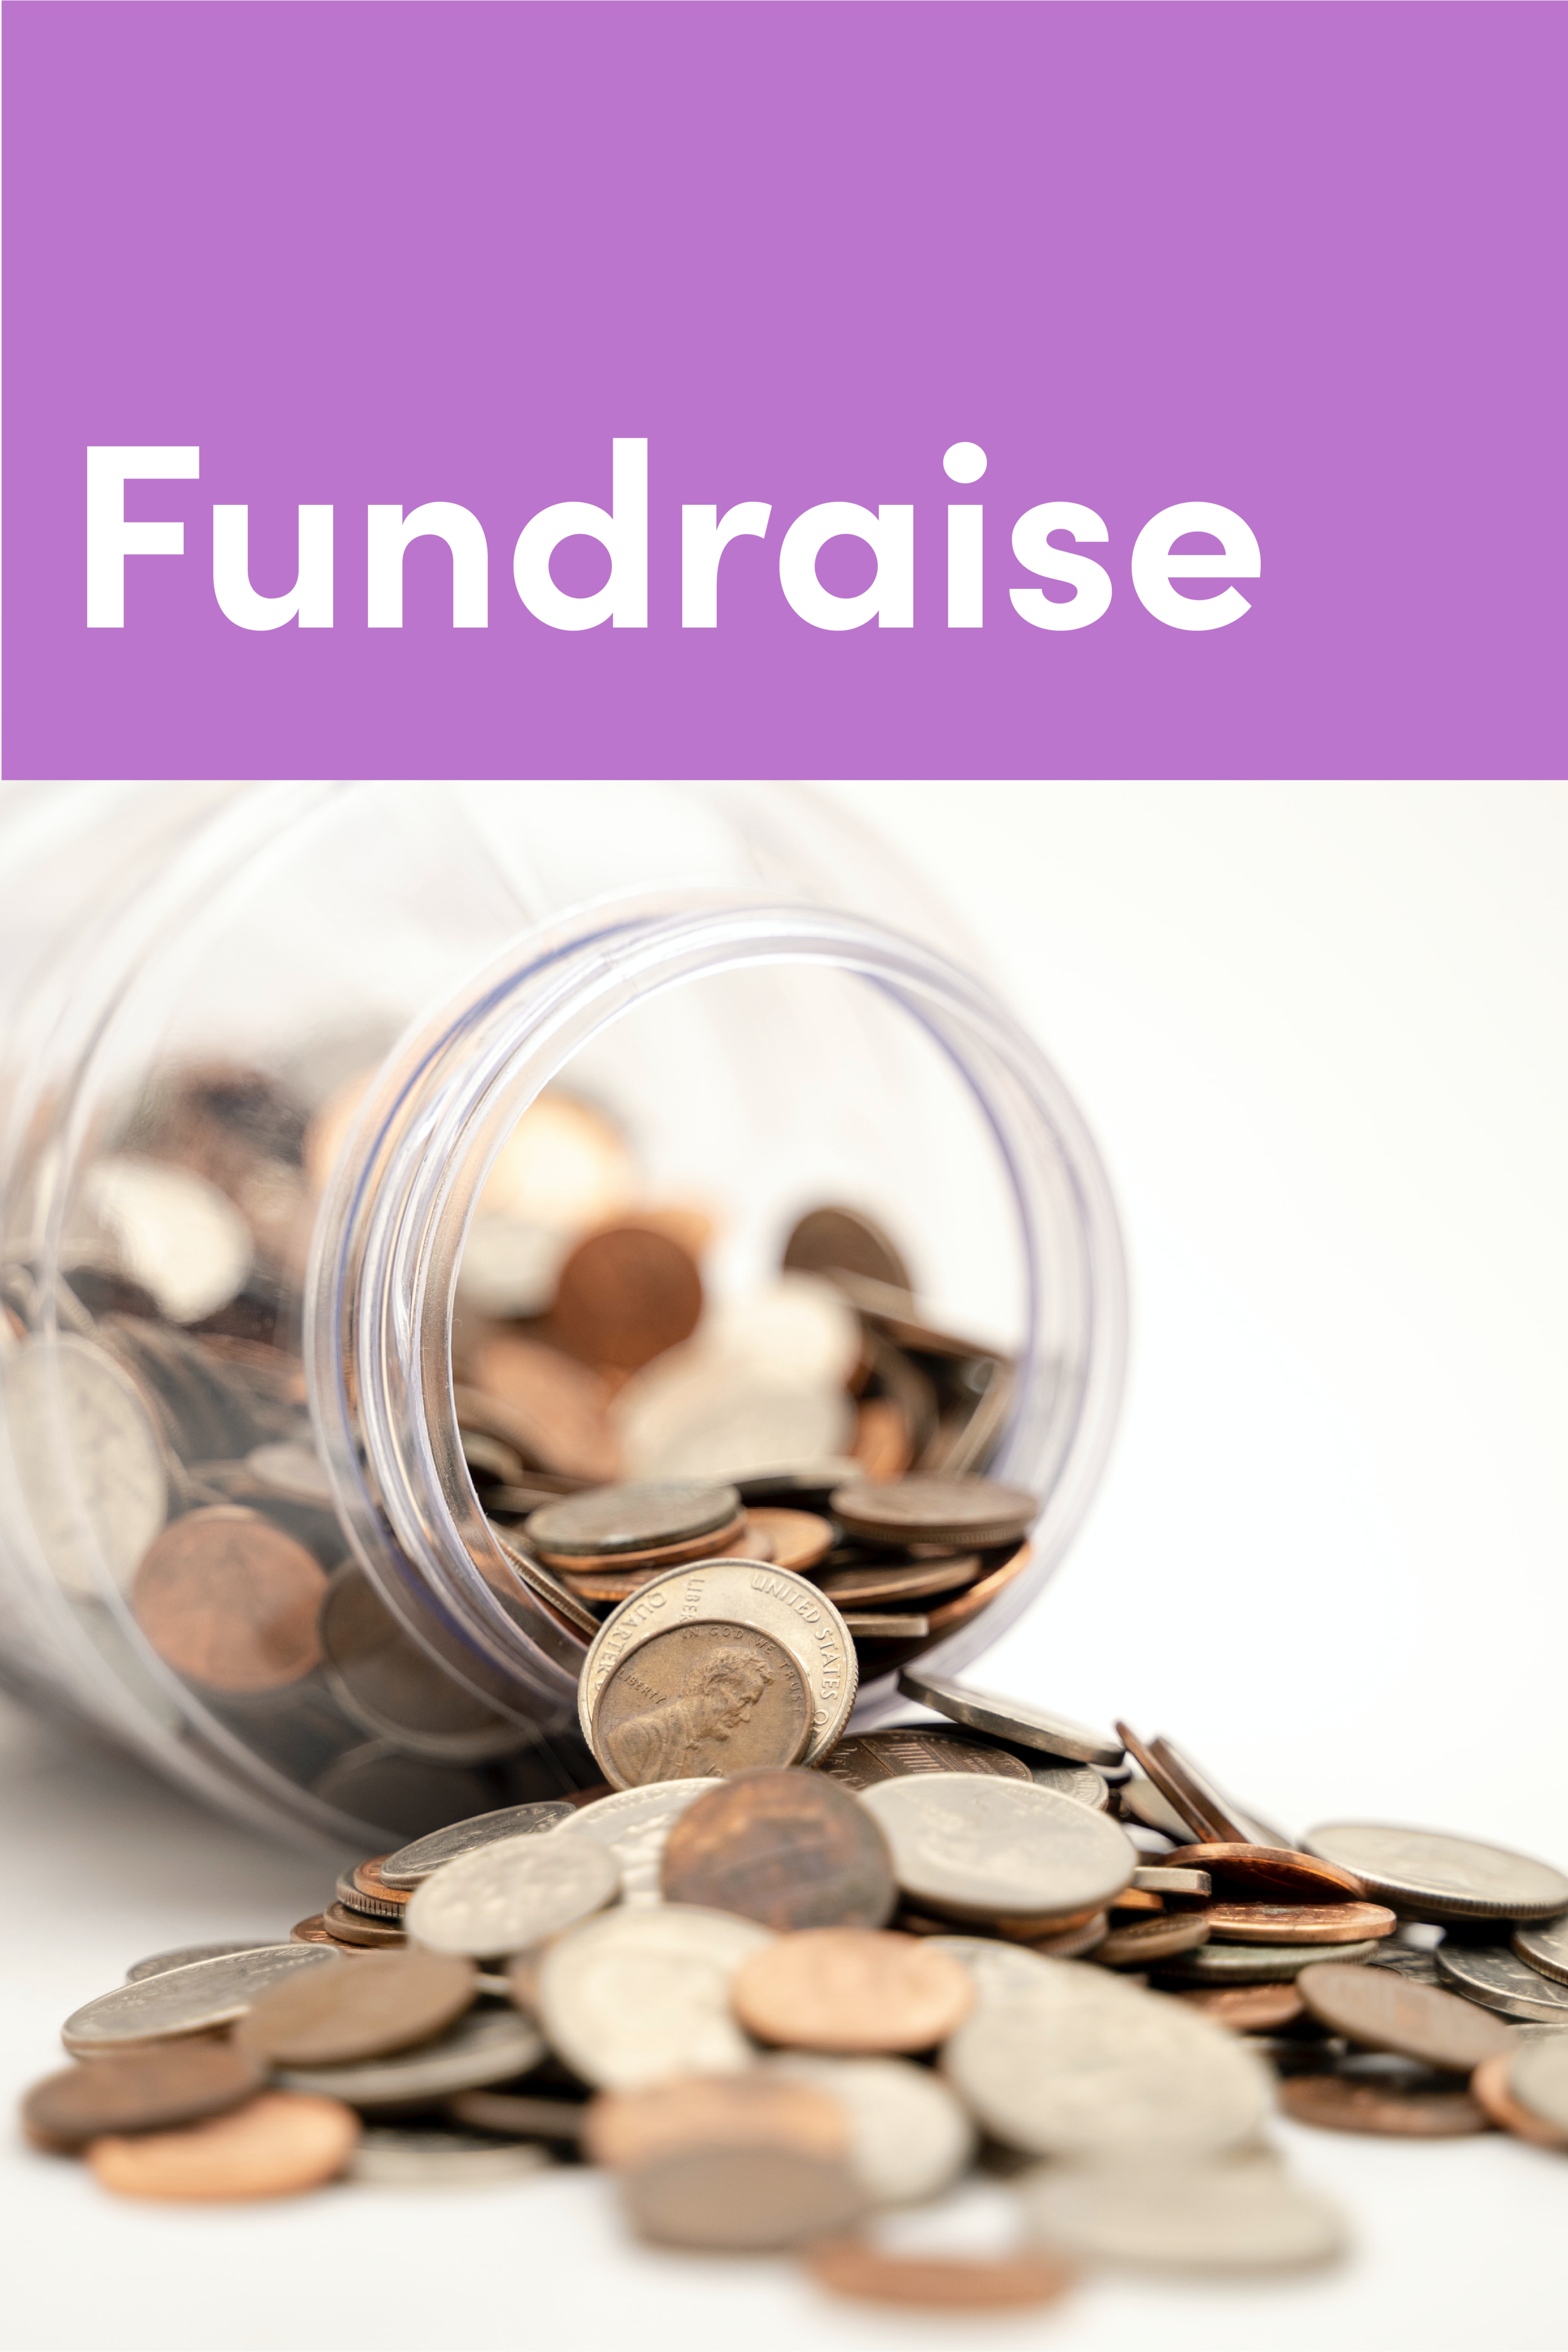 fundraise-01.png